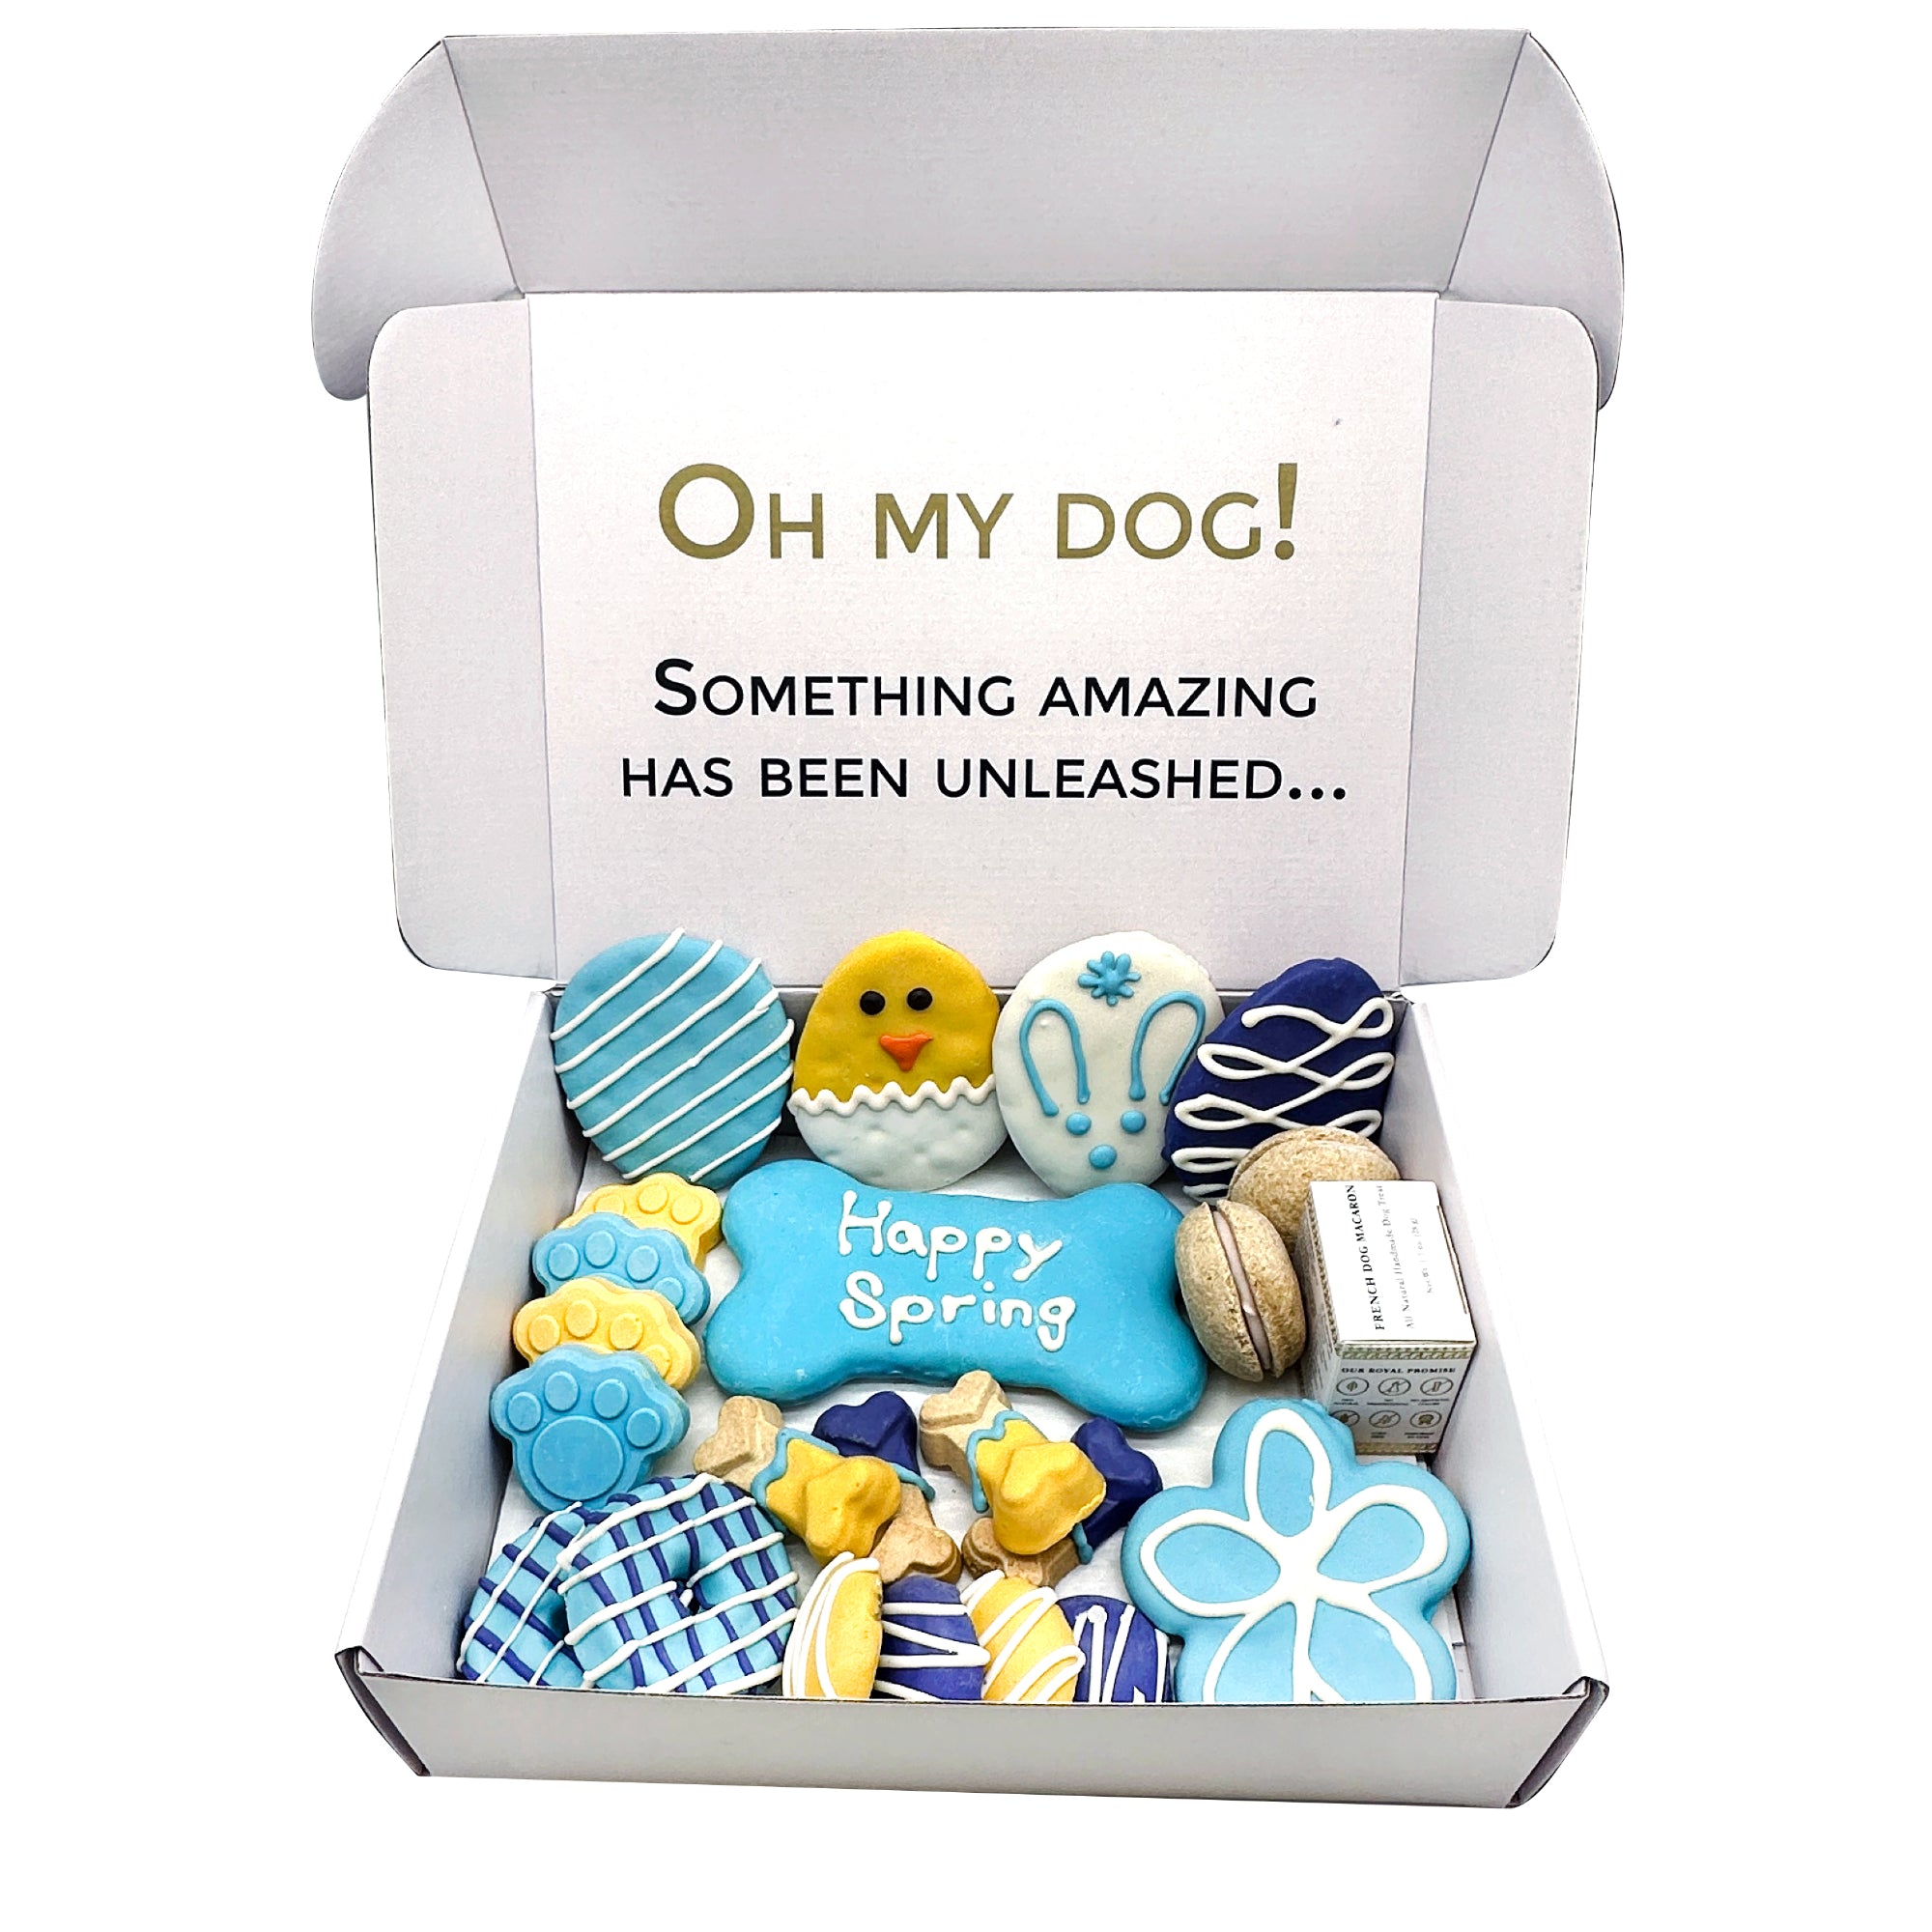 Luxury Dog Gift Ideas: a Complete Guide to Pamper Your Pooch